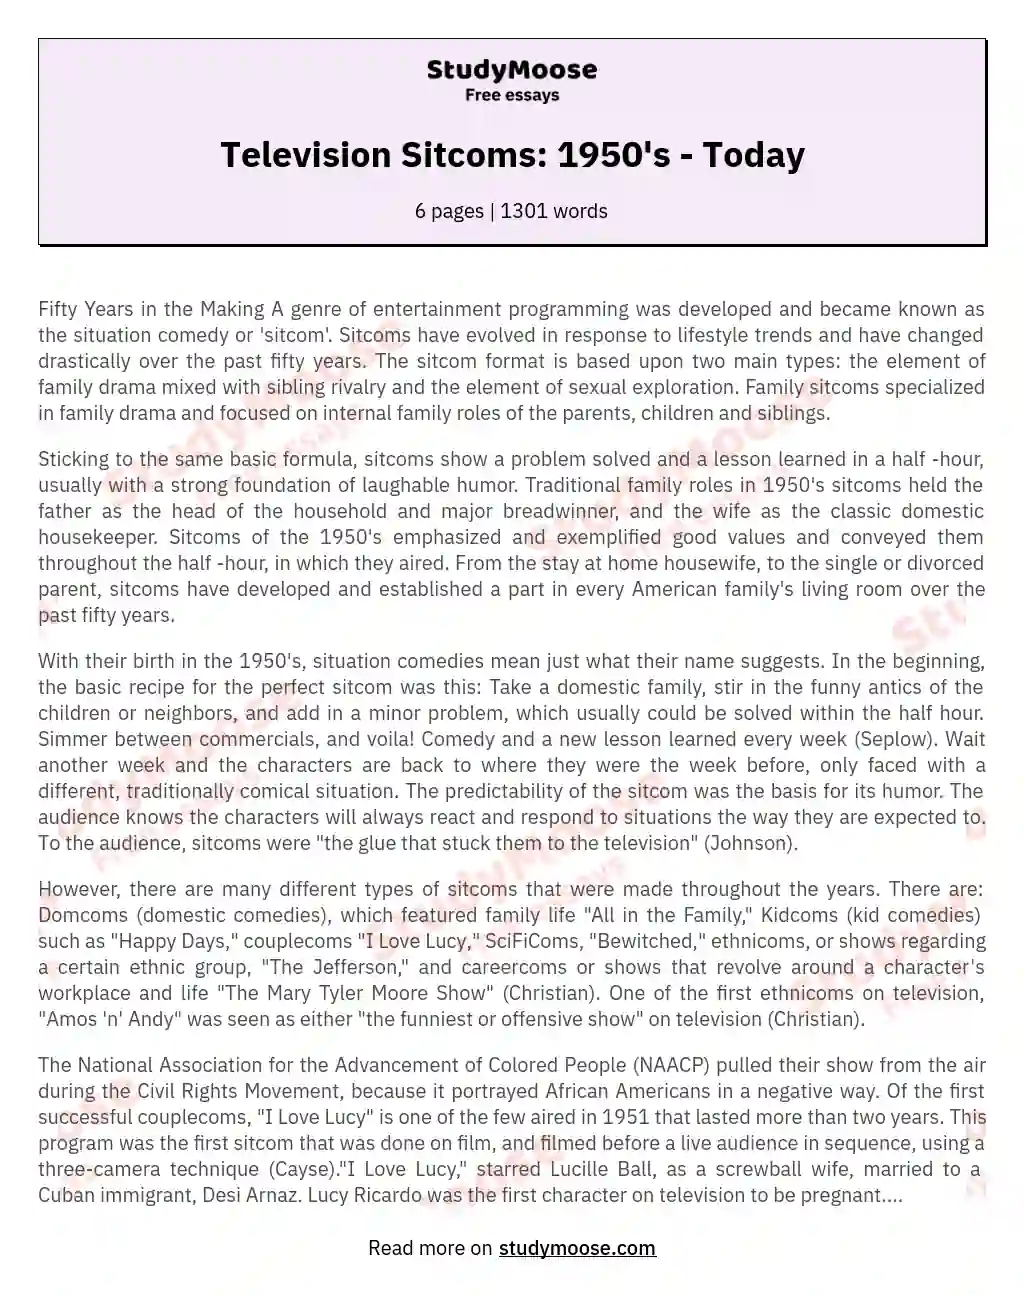 Television Sitcoms: 1950's - Today essay